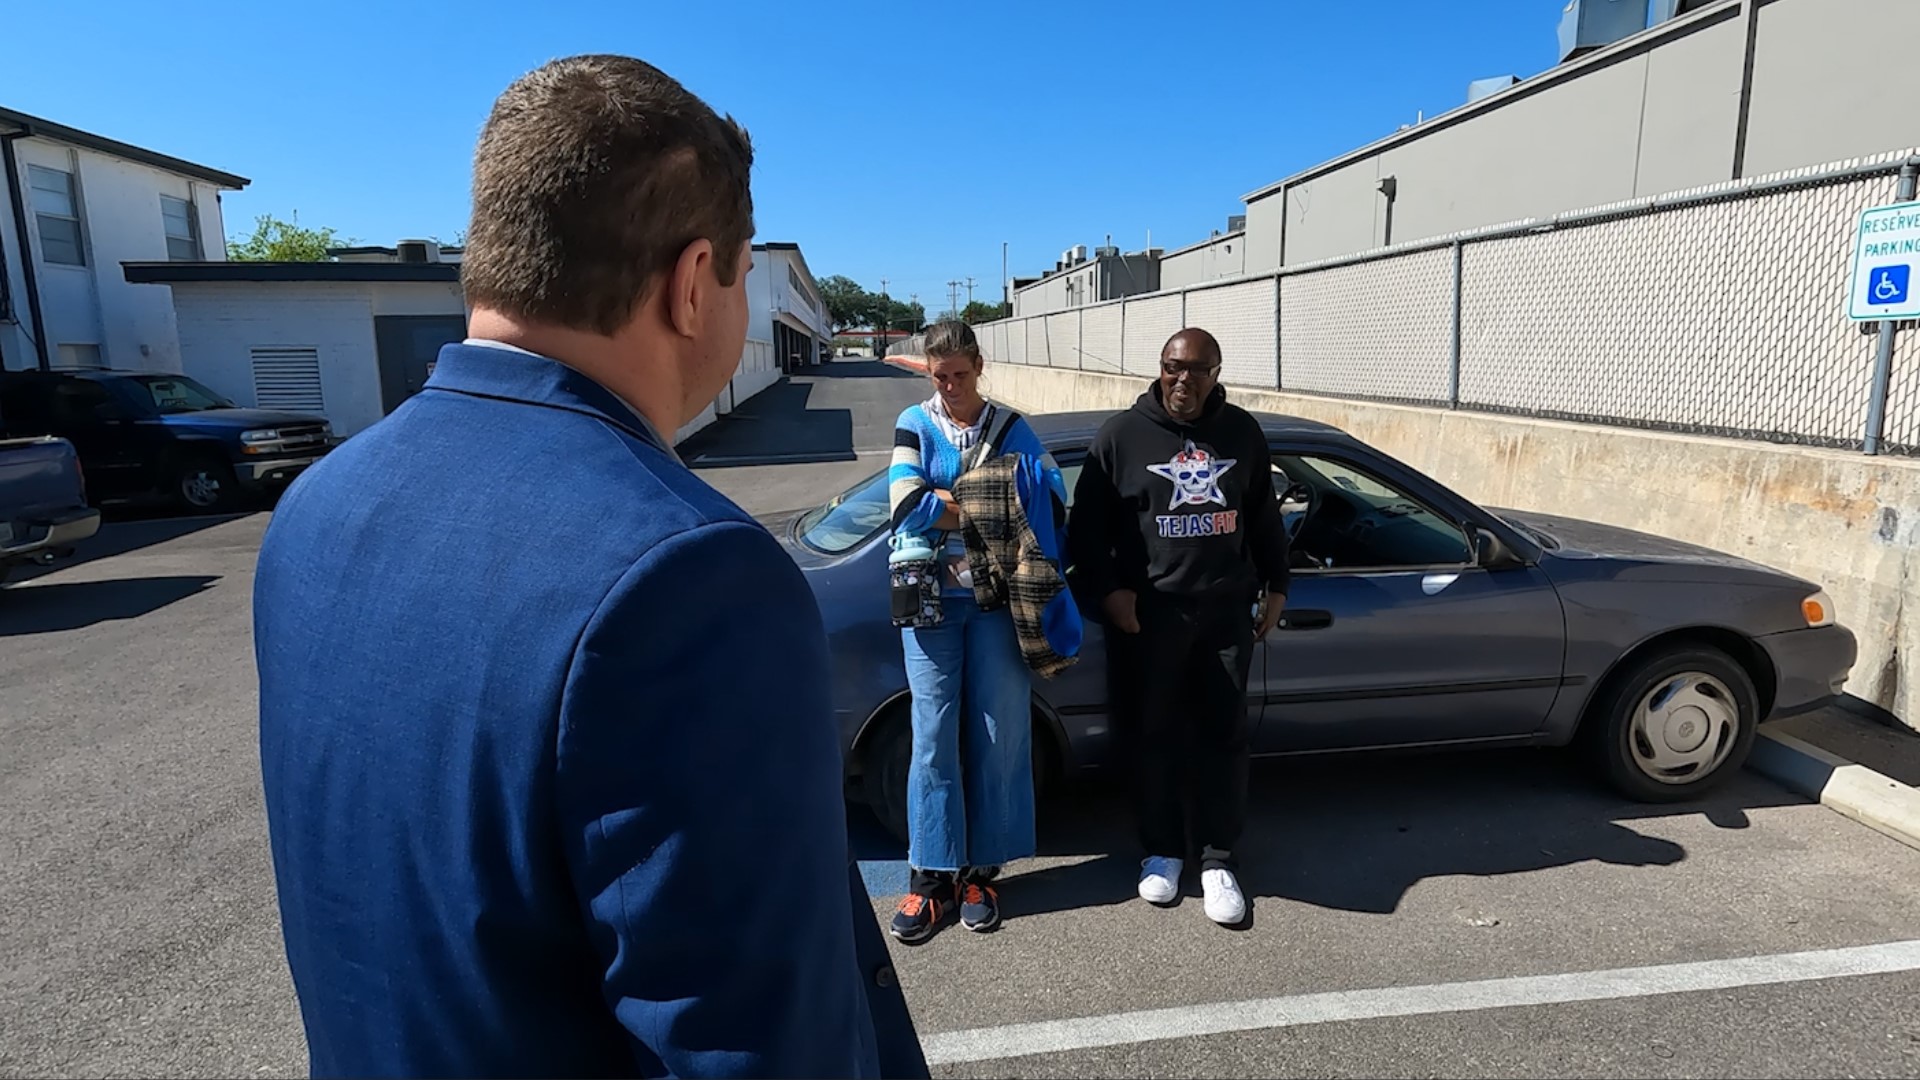 Leonard Maye was trying to move into an apartment after being homeless for five months, but he couldn't access his tax refund. KENS 5 helped him find a solution.